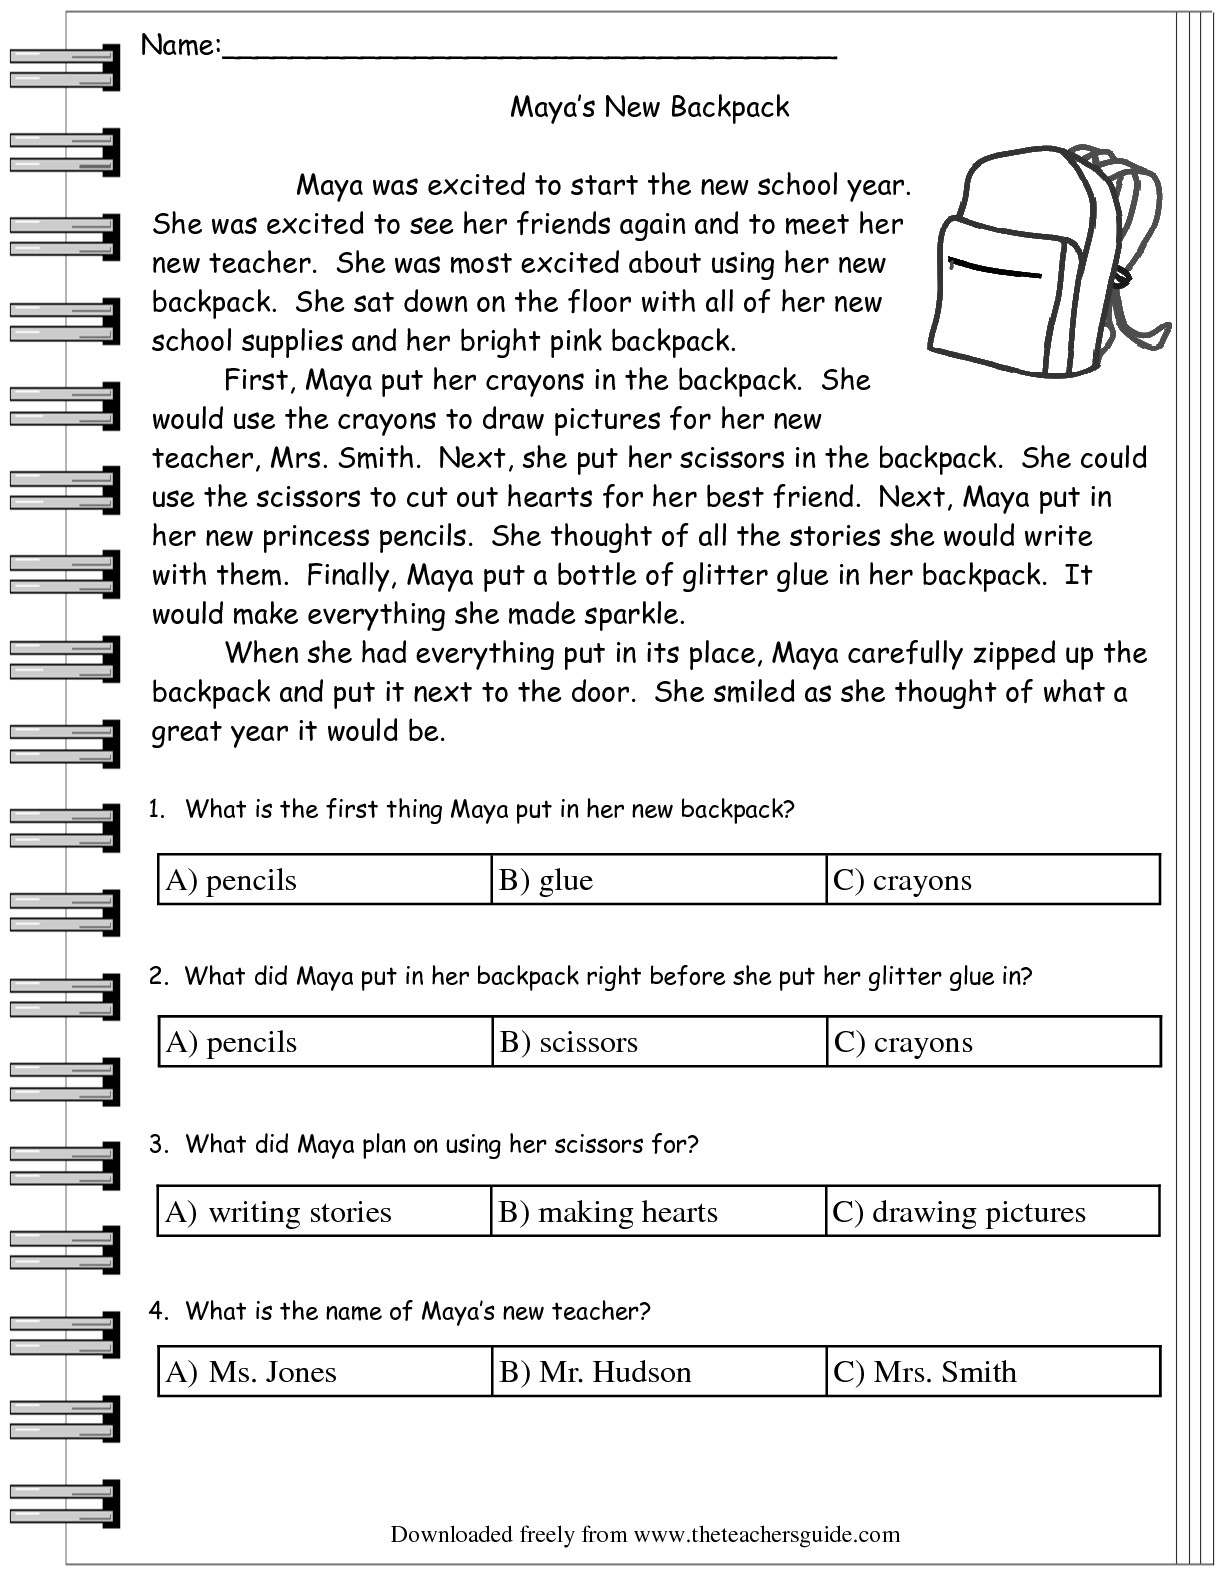 Reading Literature Comprehension Worksheets From The Teacher&amp;#039;s Guide | Printable Literature Worksheets